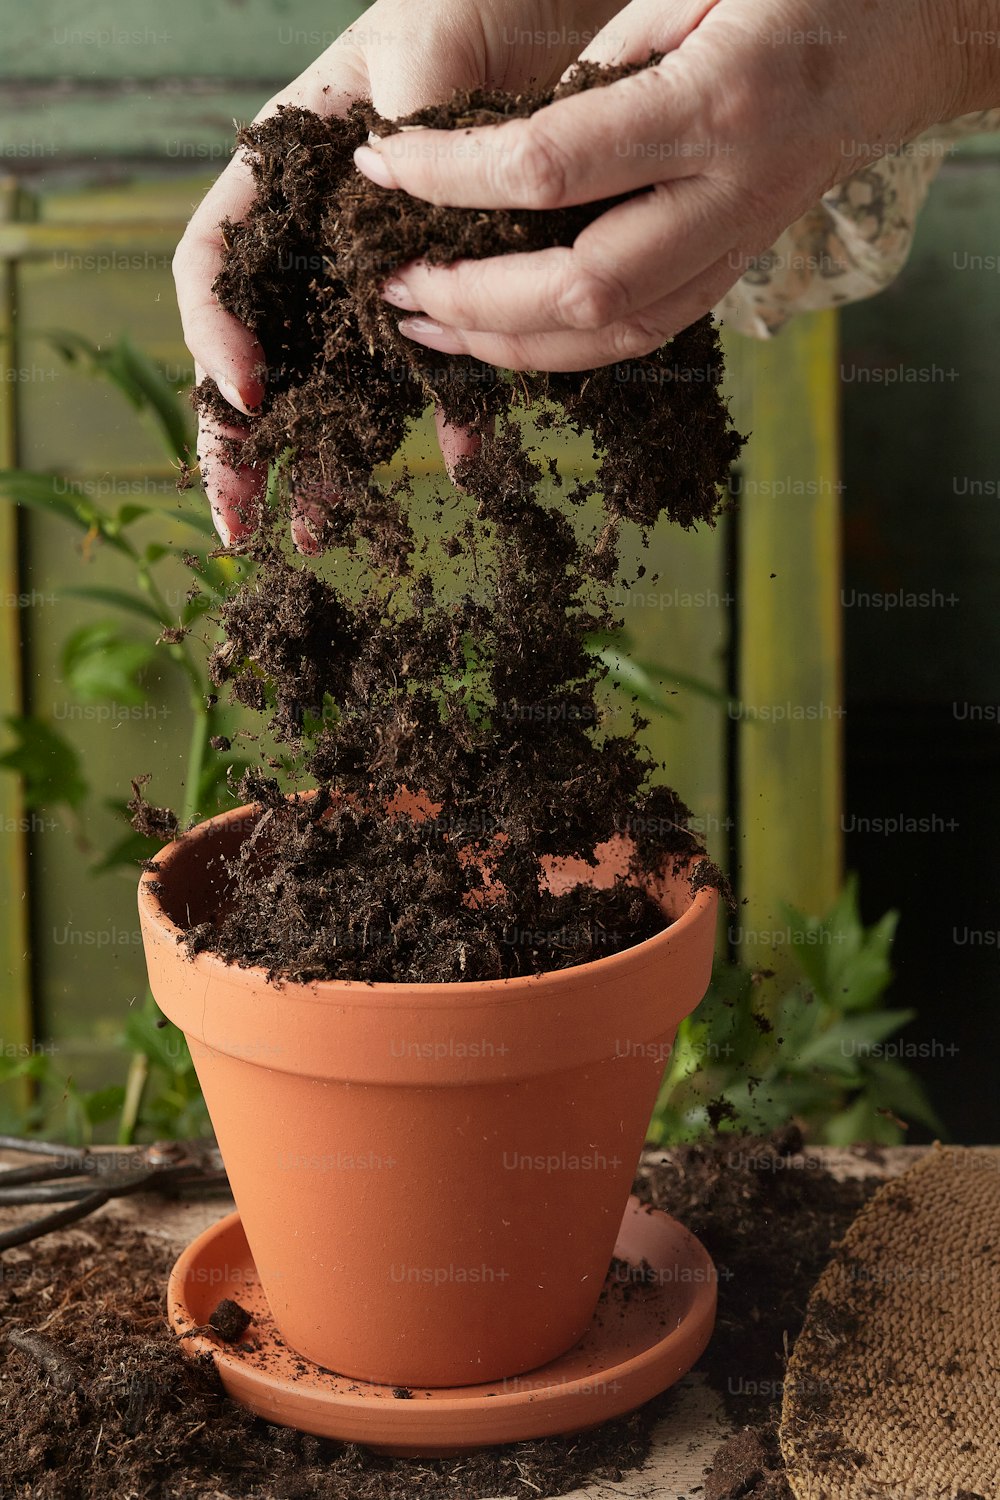 a person is digging dirt into a potted plant